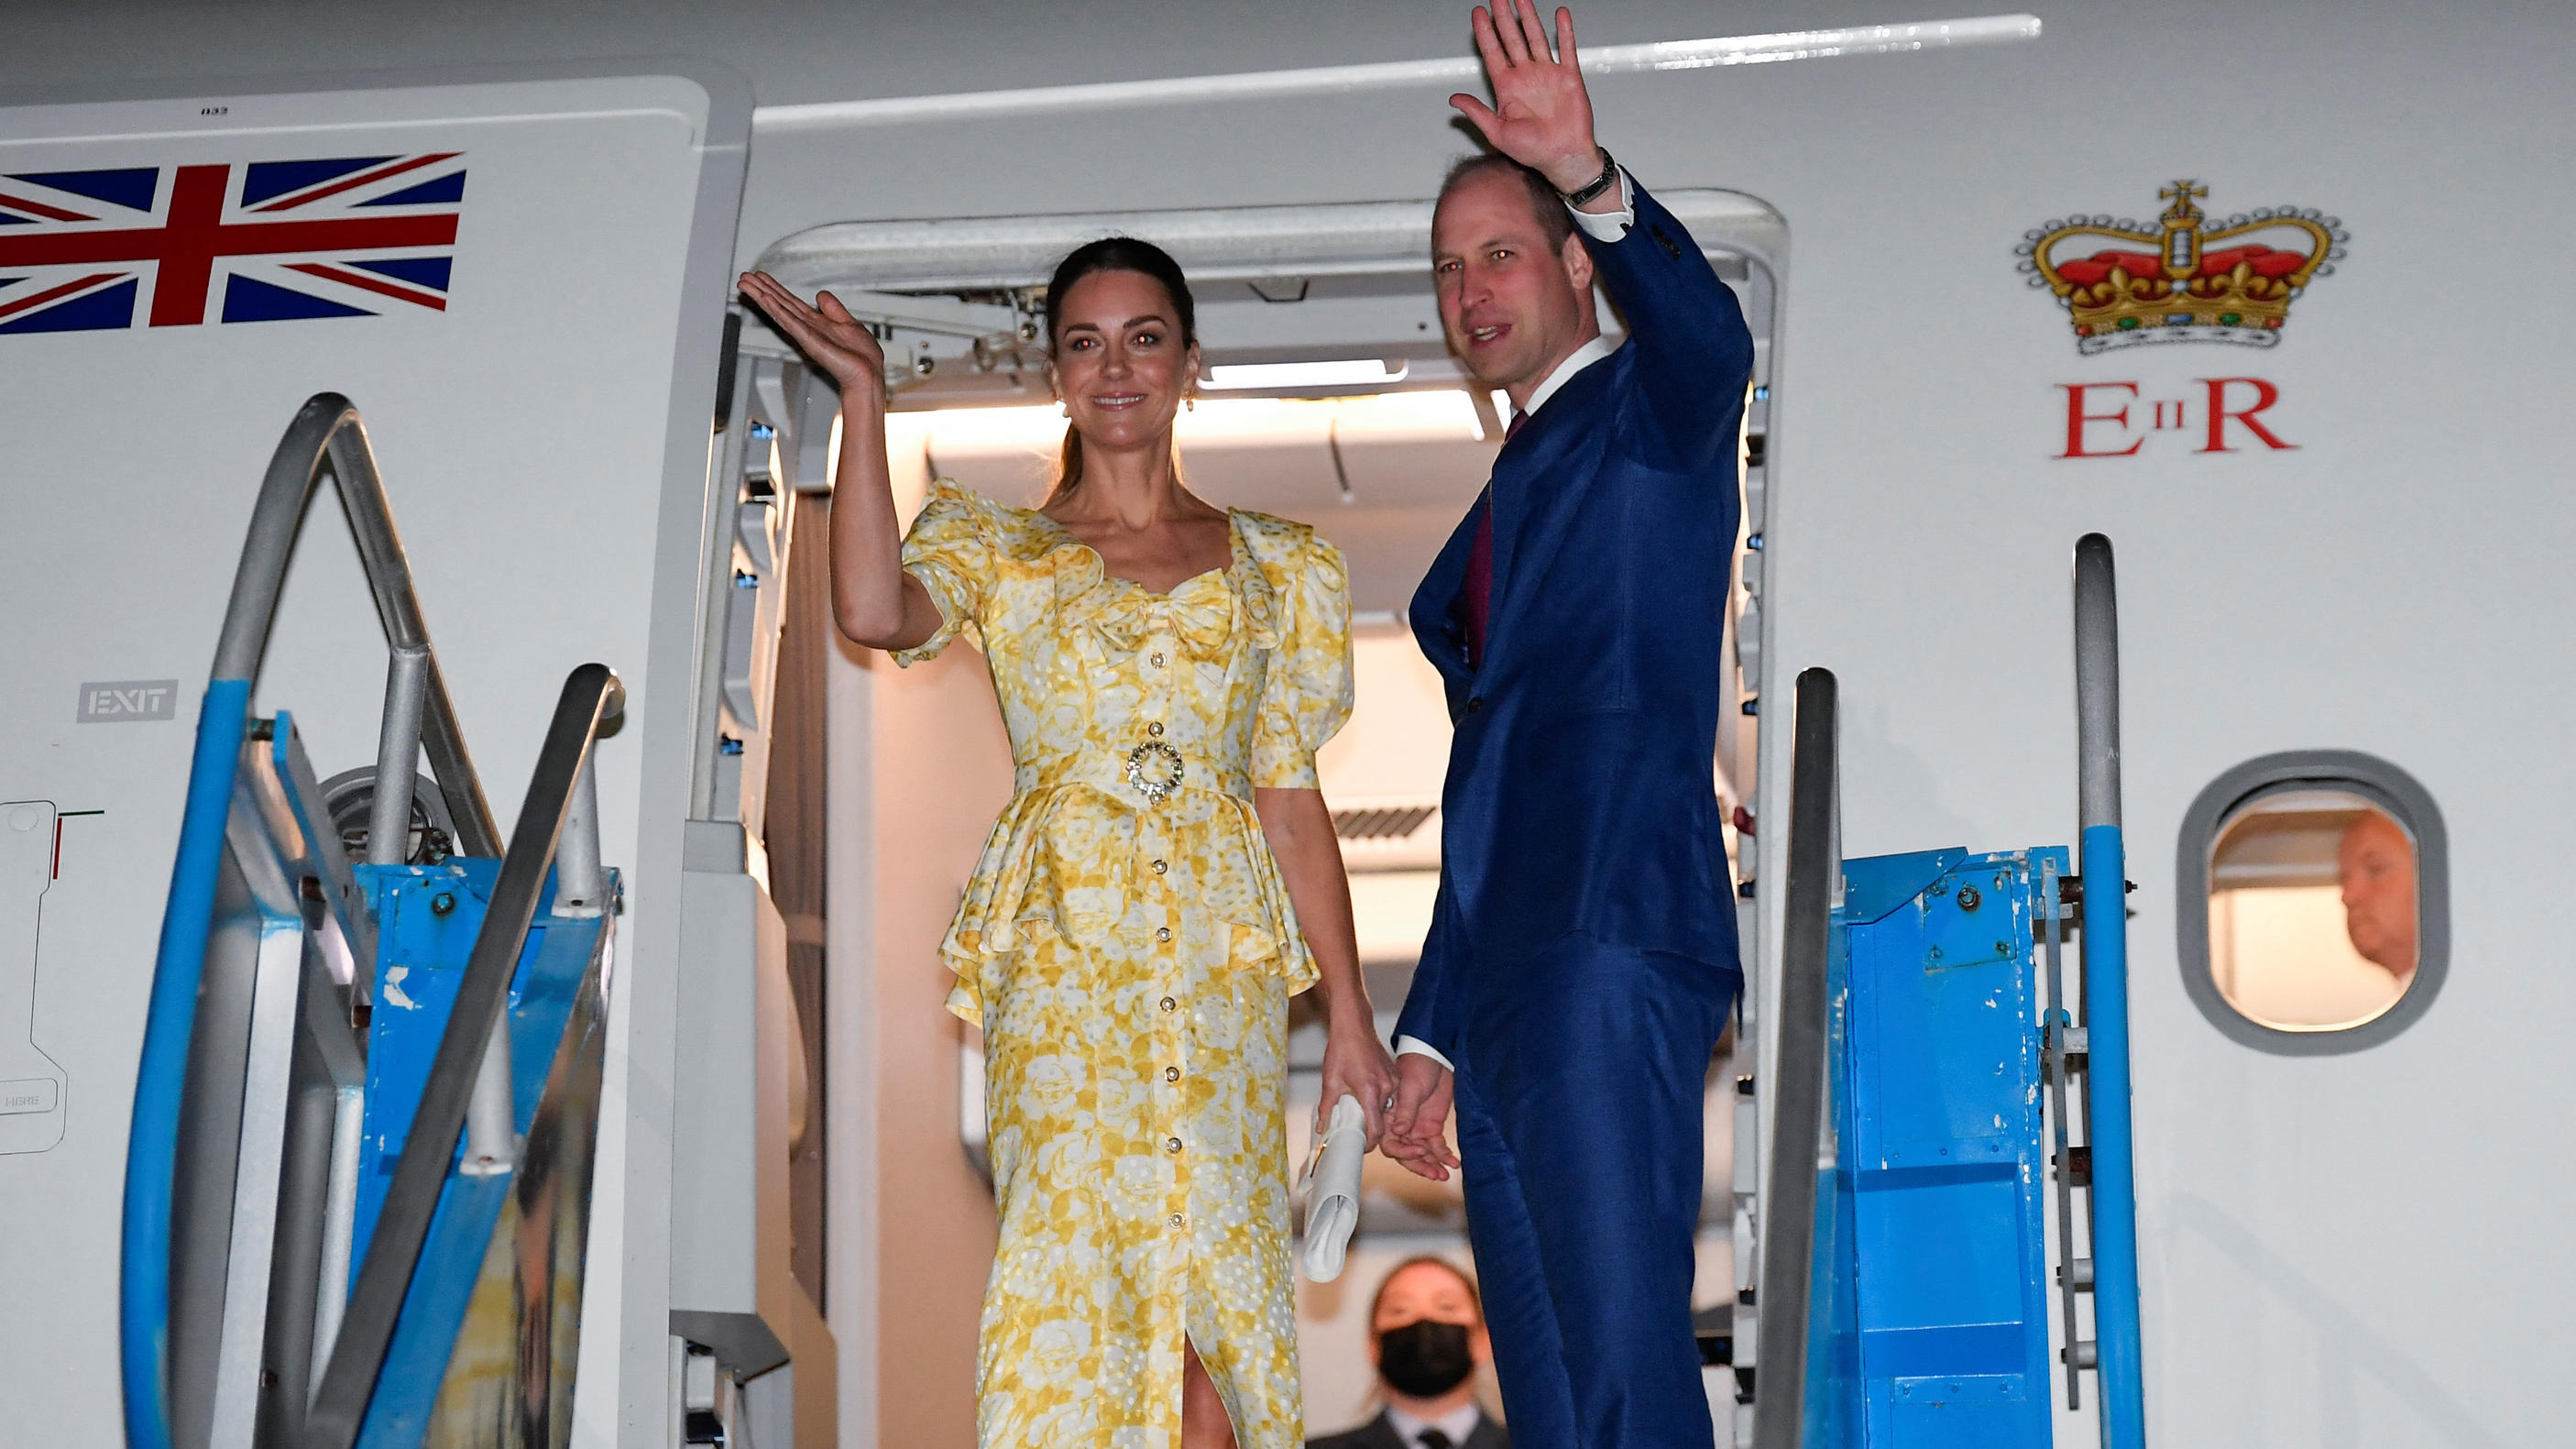 Royal visit to the Caribbean - Day 8. The Duke and Duchess of Cambridge board a plane at Lynden Pindling International Airport as they depart the Bahamas, at the end of their tour of the Caribbean taken on behalf of the Queen to mark her Platinum Jub